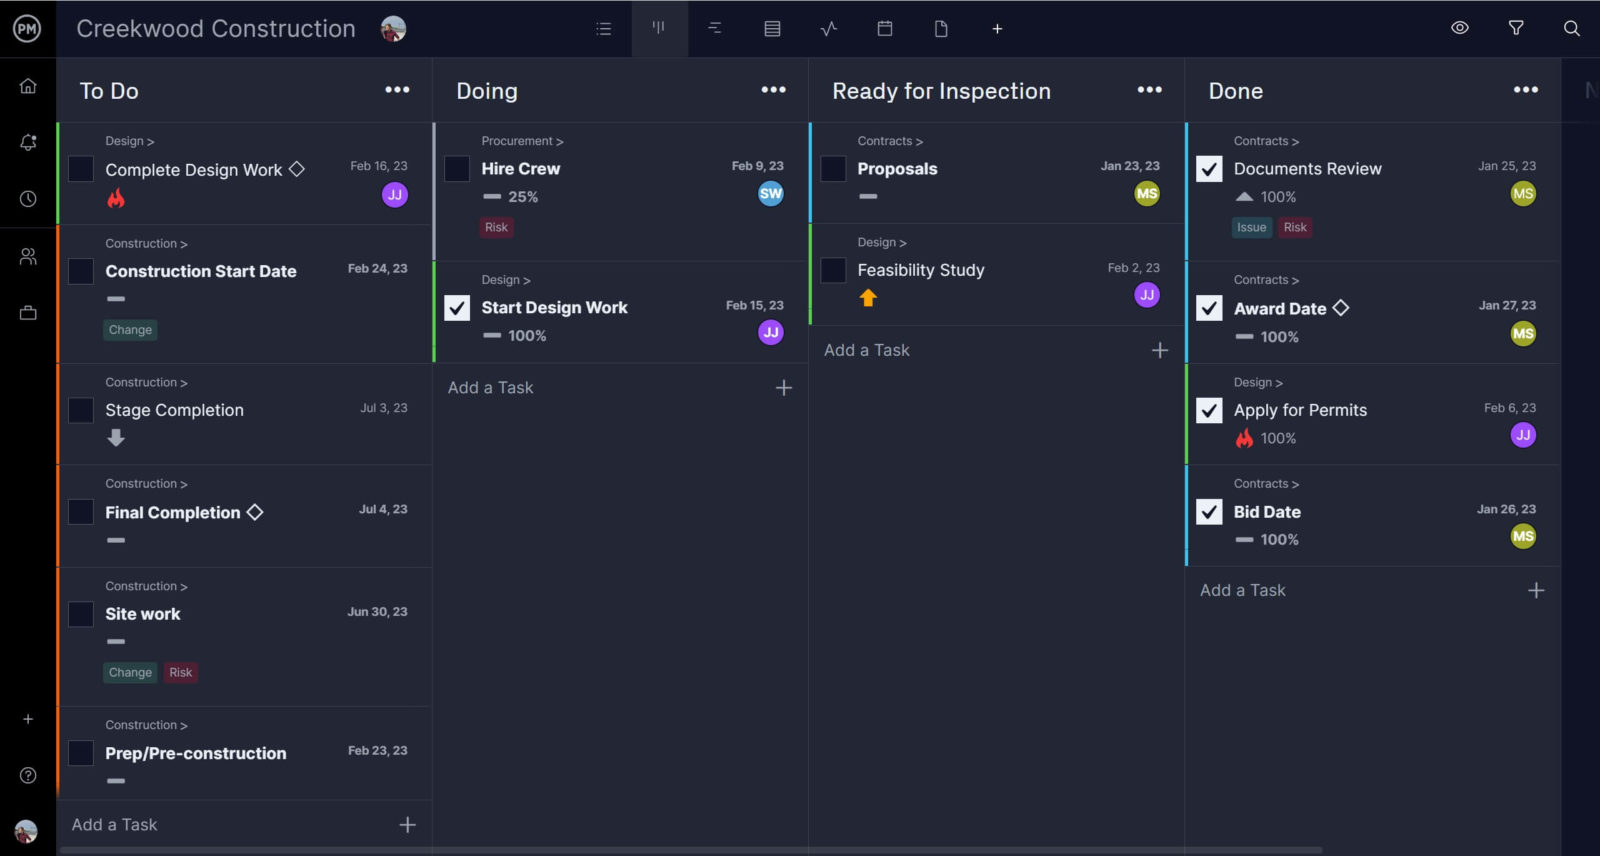 ProjectManager's kanban board lets you track progress with work schedules